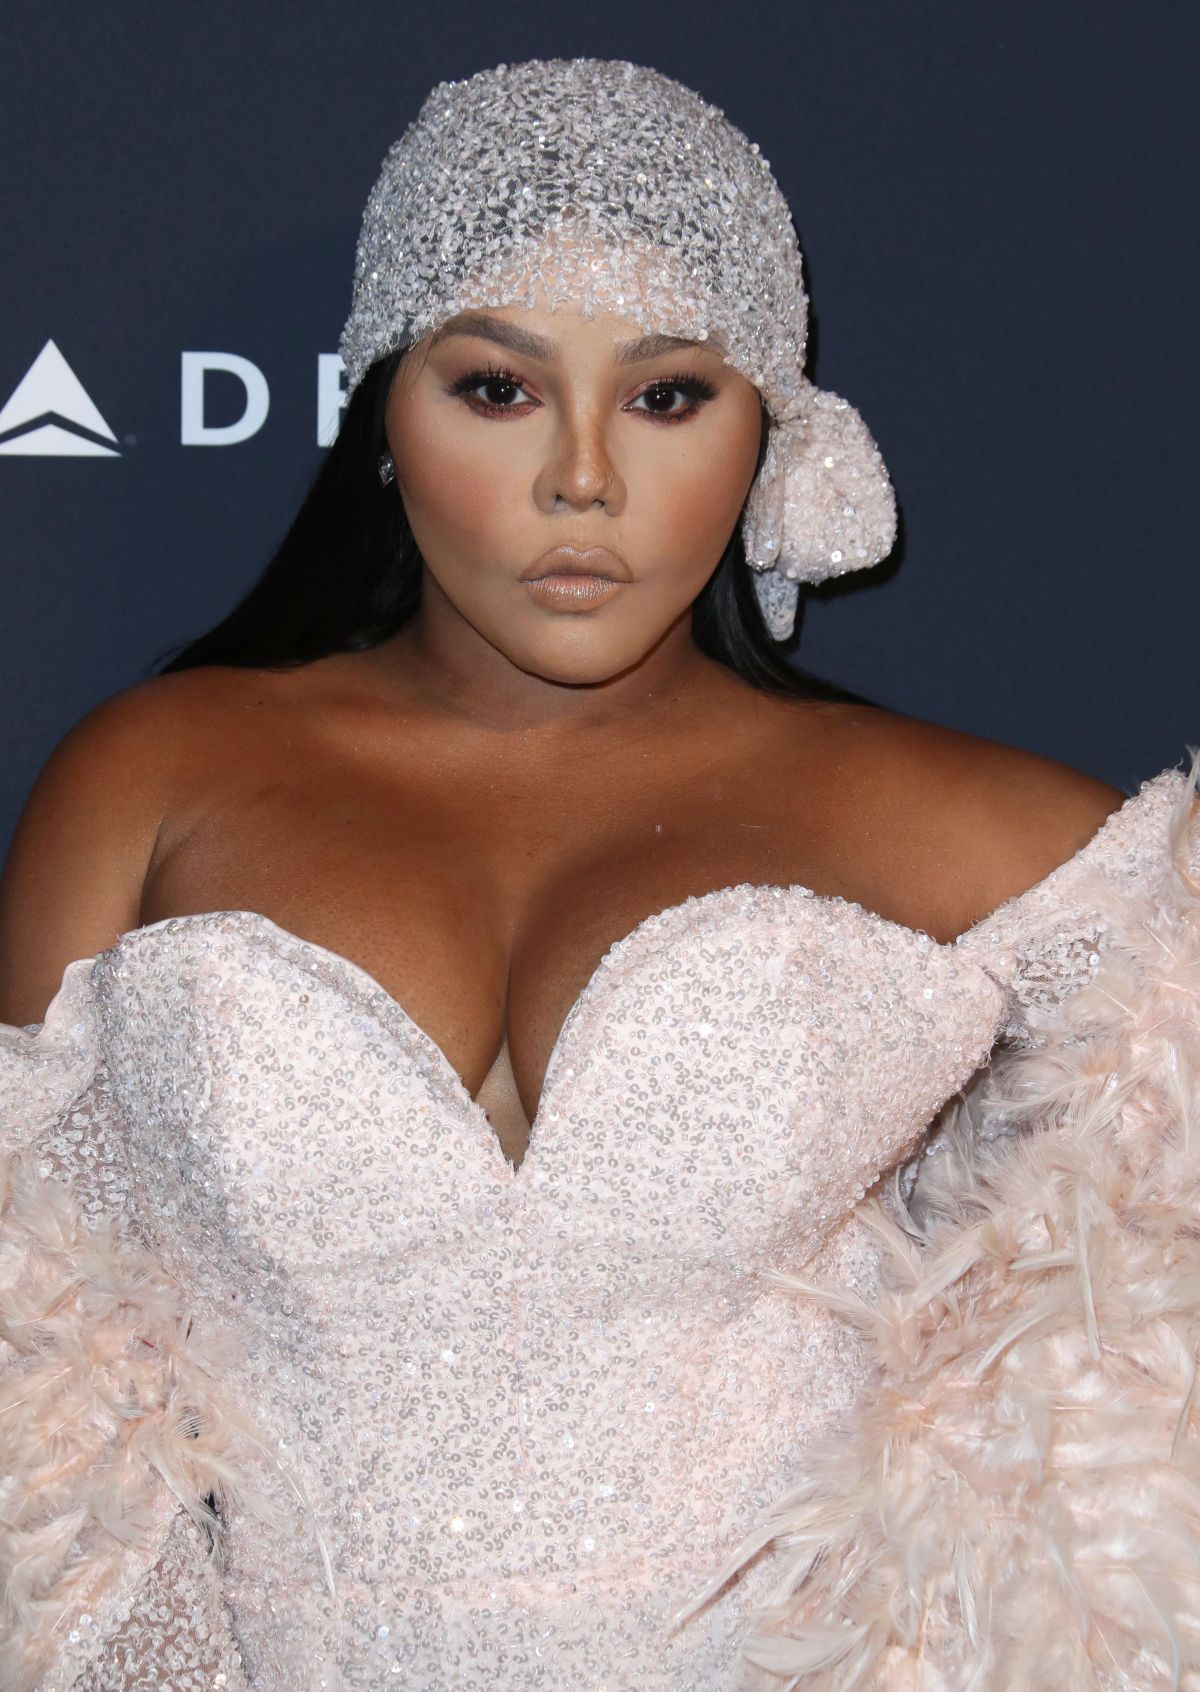 LIL’ KIM at Recording Academy and Clive Davis PreGrammy Gala in